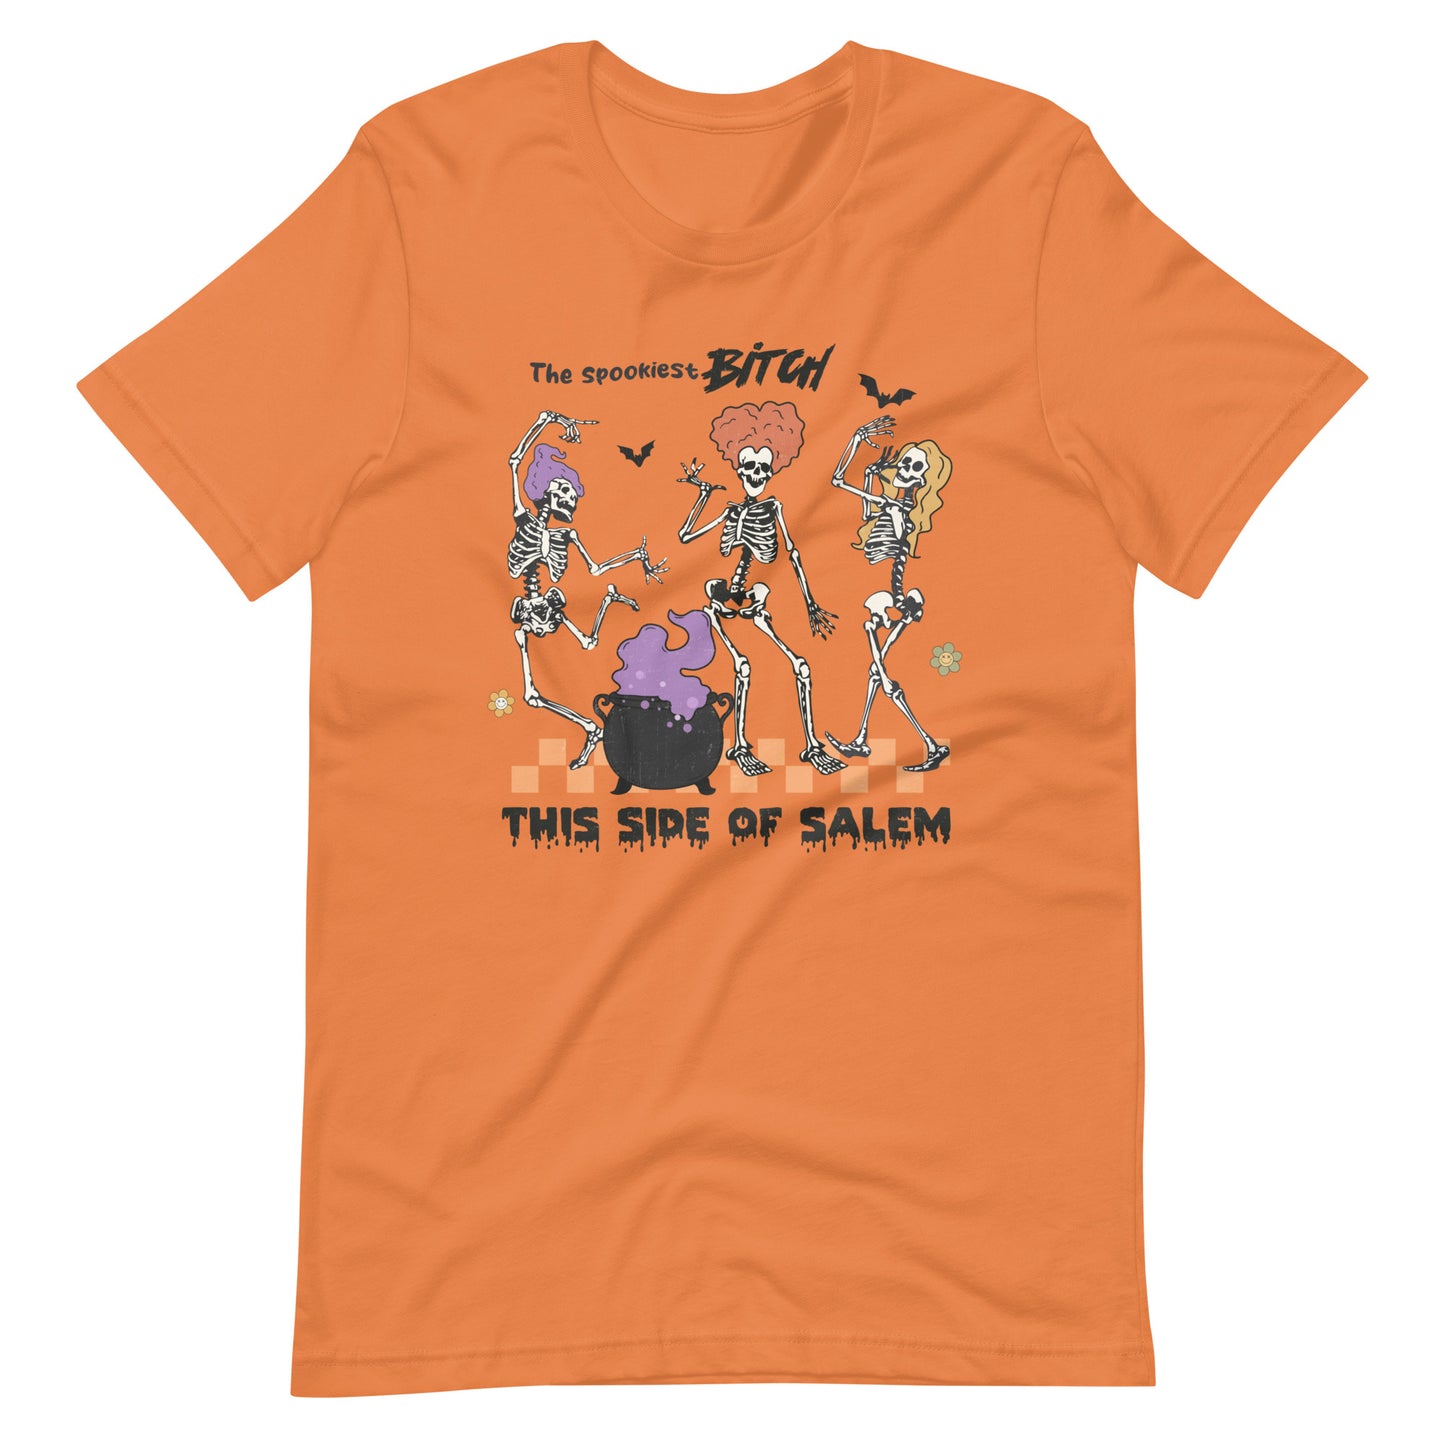 The Spookiest Bitch this side of Salem Sisters Skeleton Halloween Spooky Unisex t-shirt